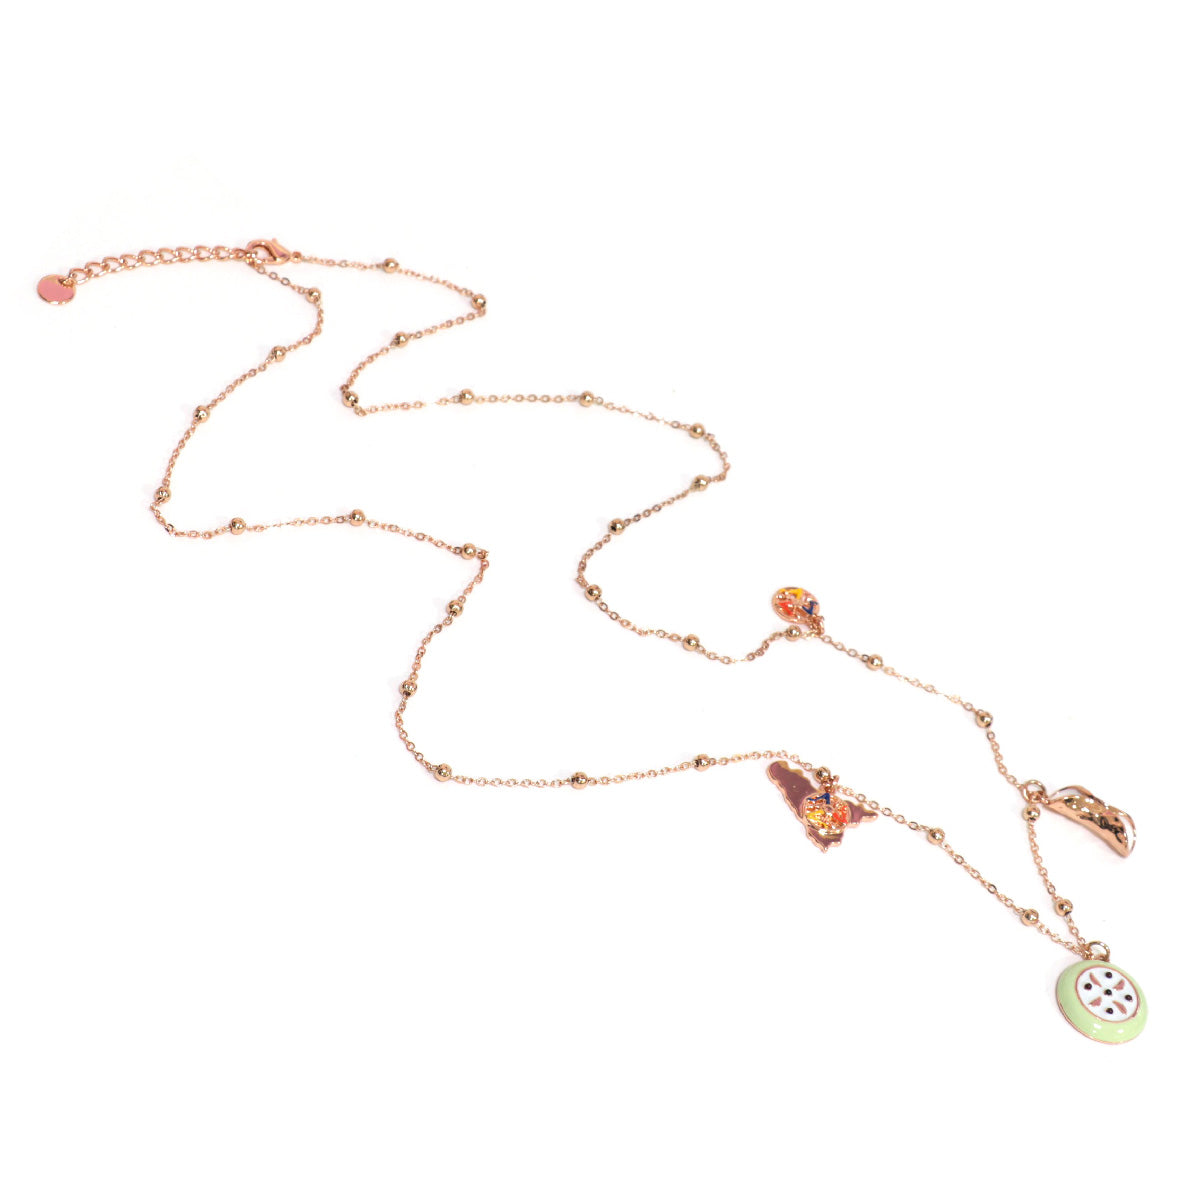 Multicond metal necklace, with charms cannolo, cassata and Sicilia pendant, embellished with colored glazes